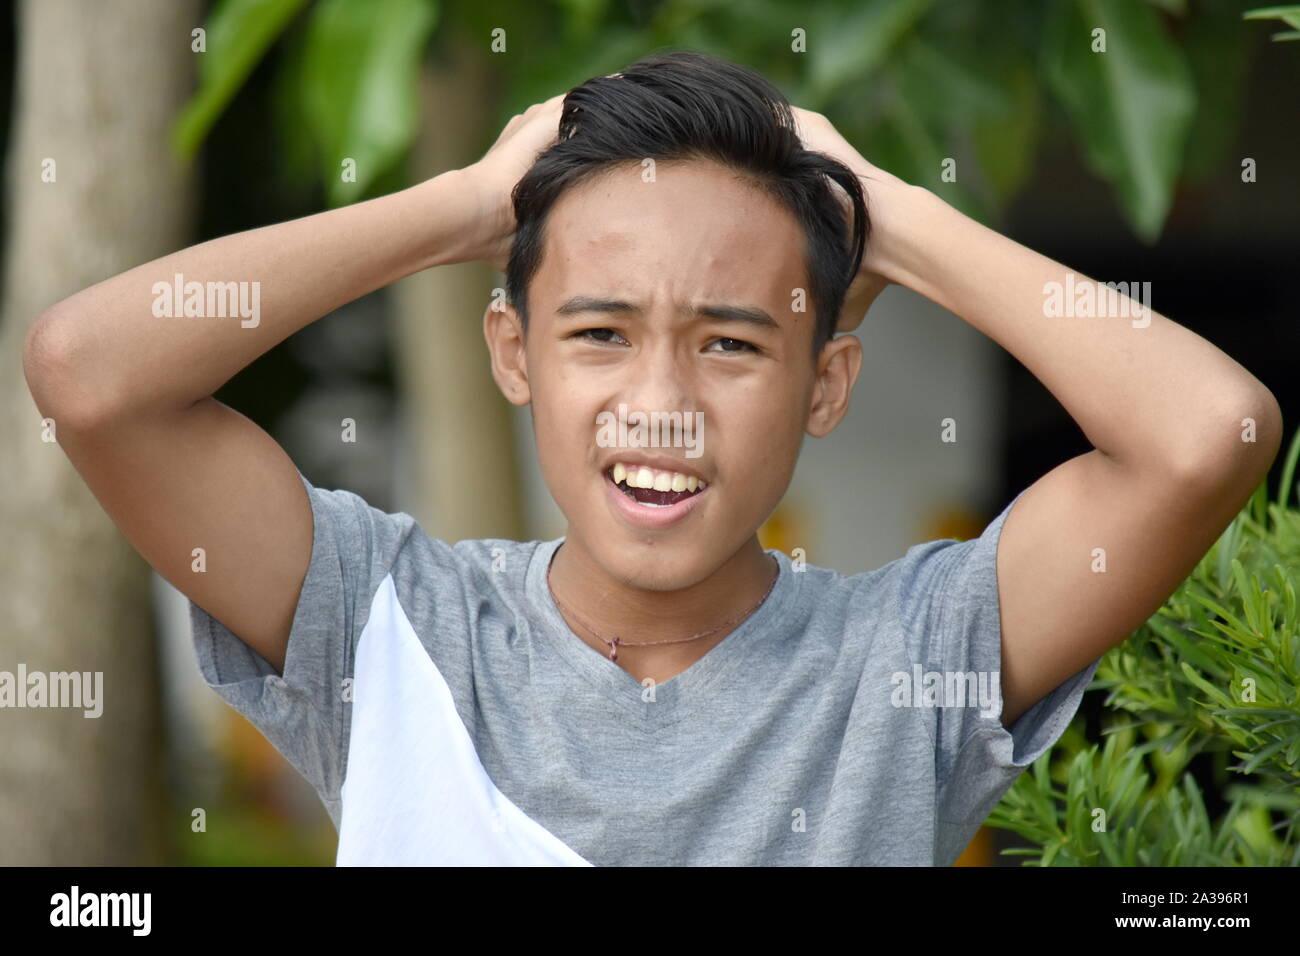 A Confused Young Asian Boy Stock Photo